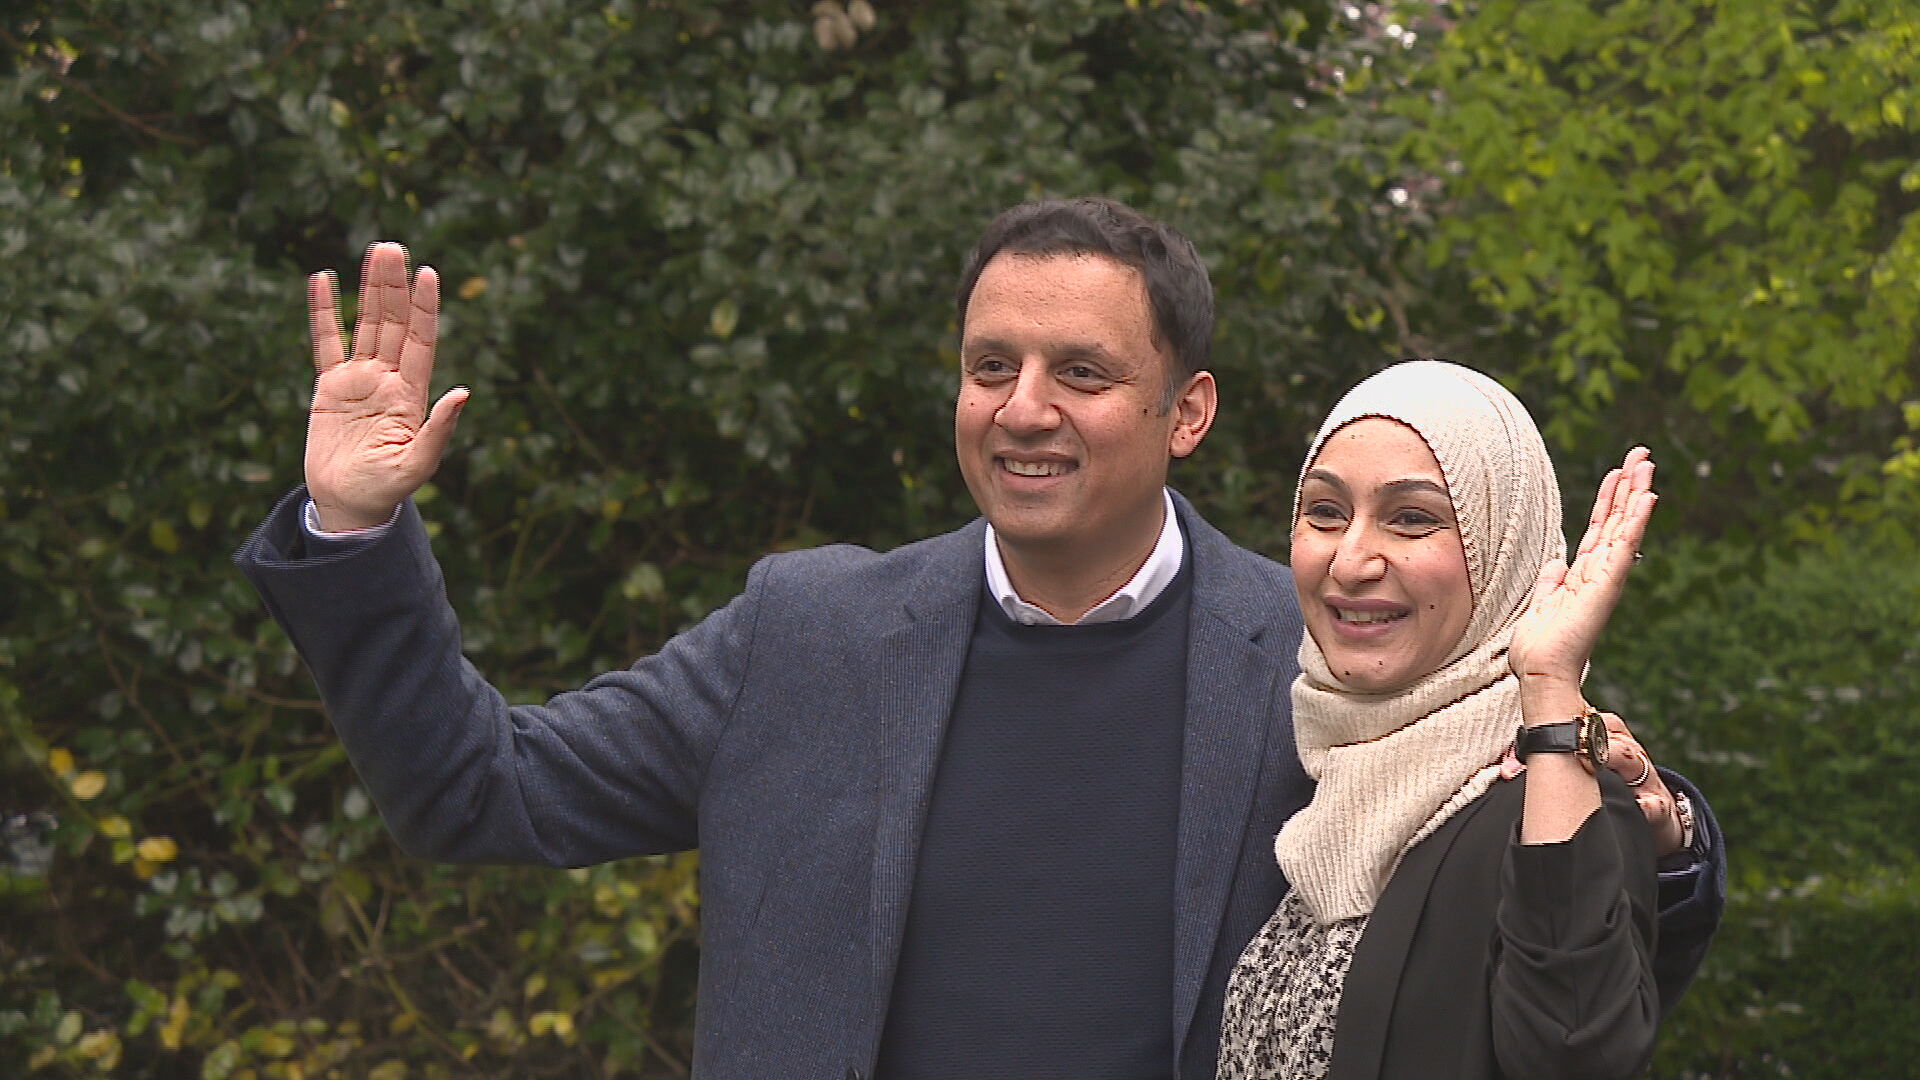 Anas Sarwar and his wife Furheen arriving to vote.